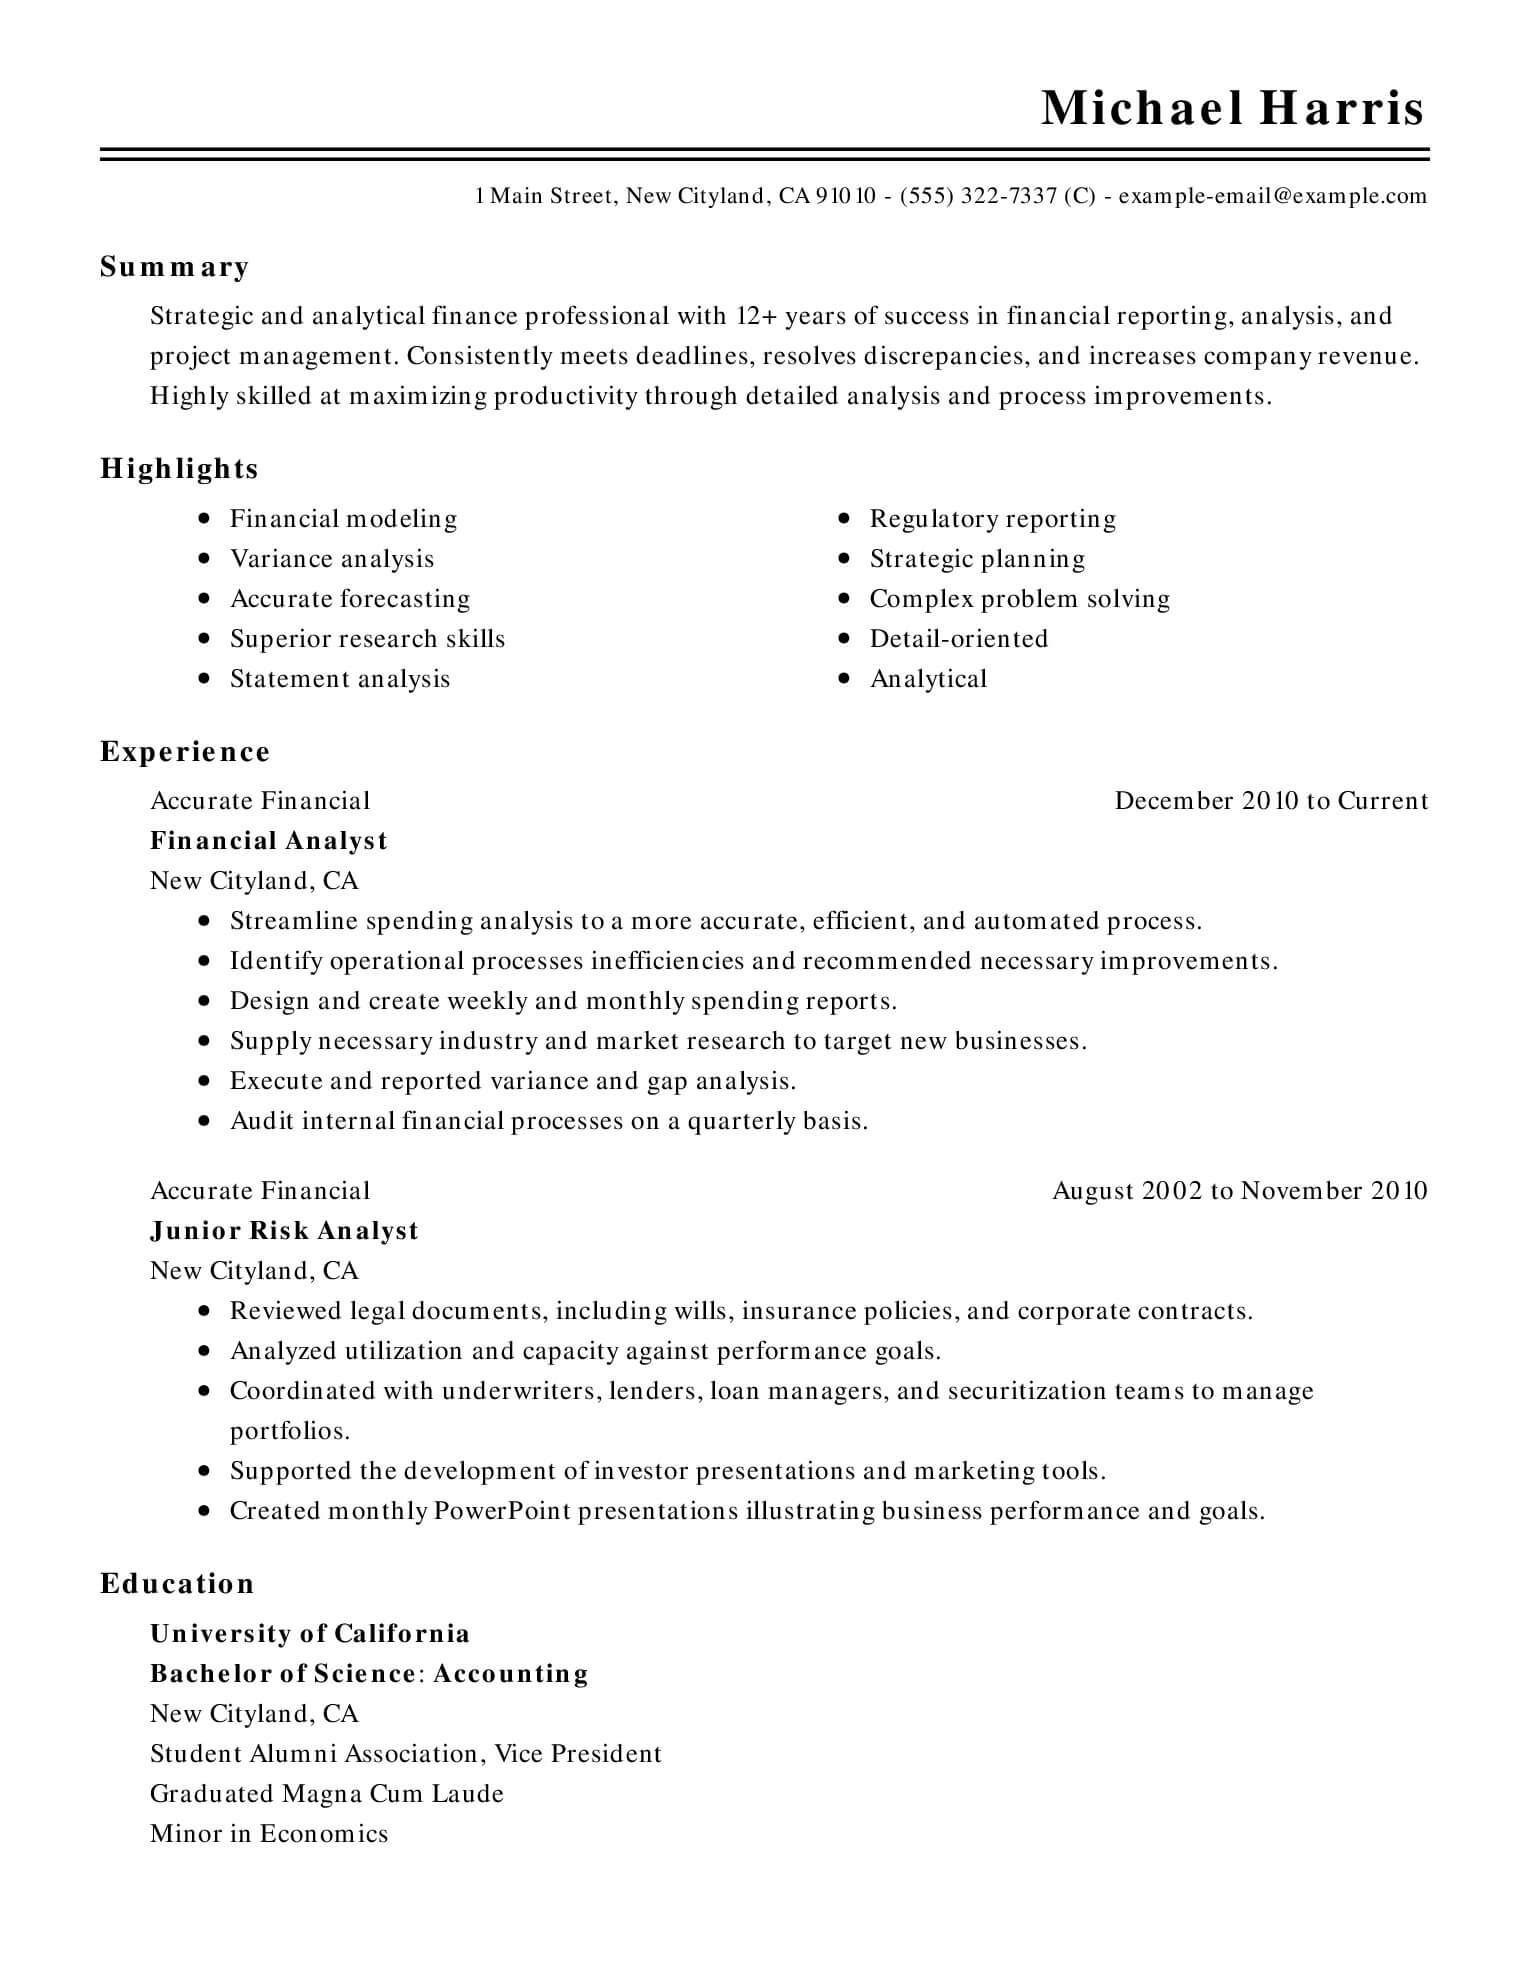 Free Resume Templates For Word Cv Template Wordo It Resume Ideas Accounting Finance Example Classic Picture Templates With Free Download Document free resume templates for word|wikiresume.com